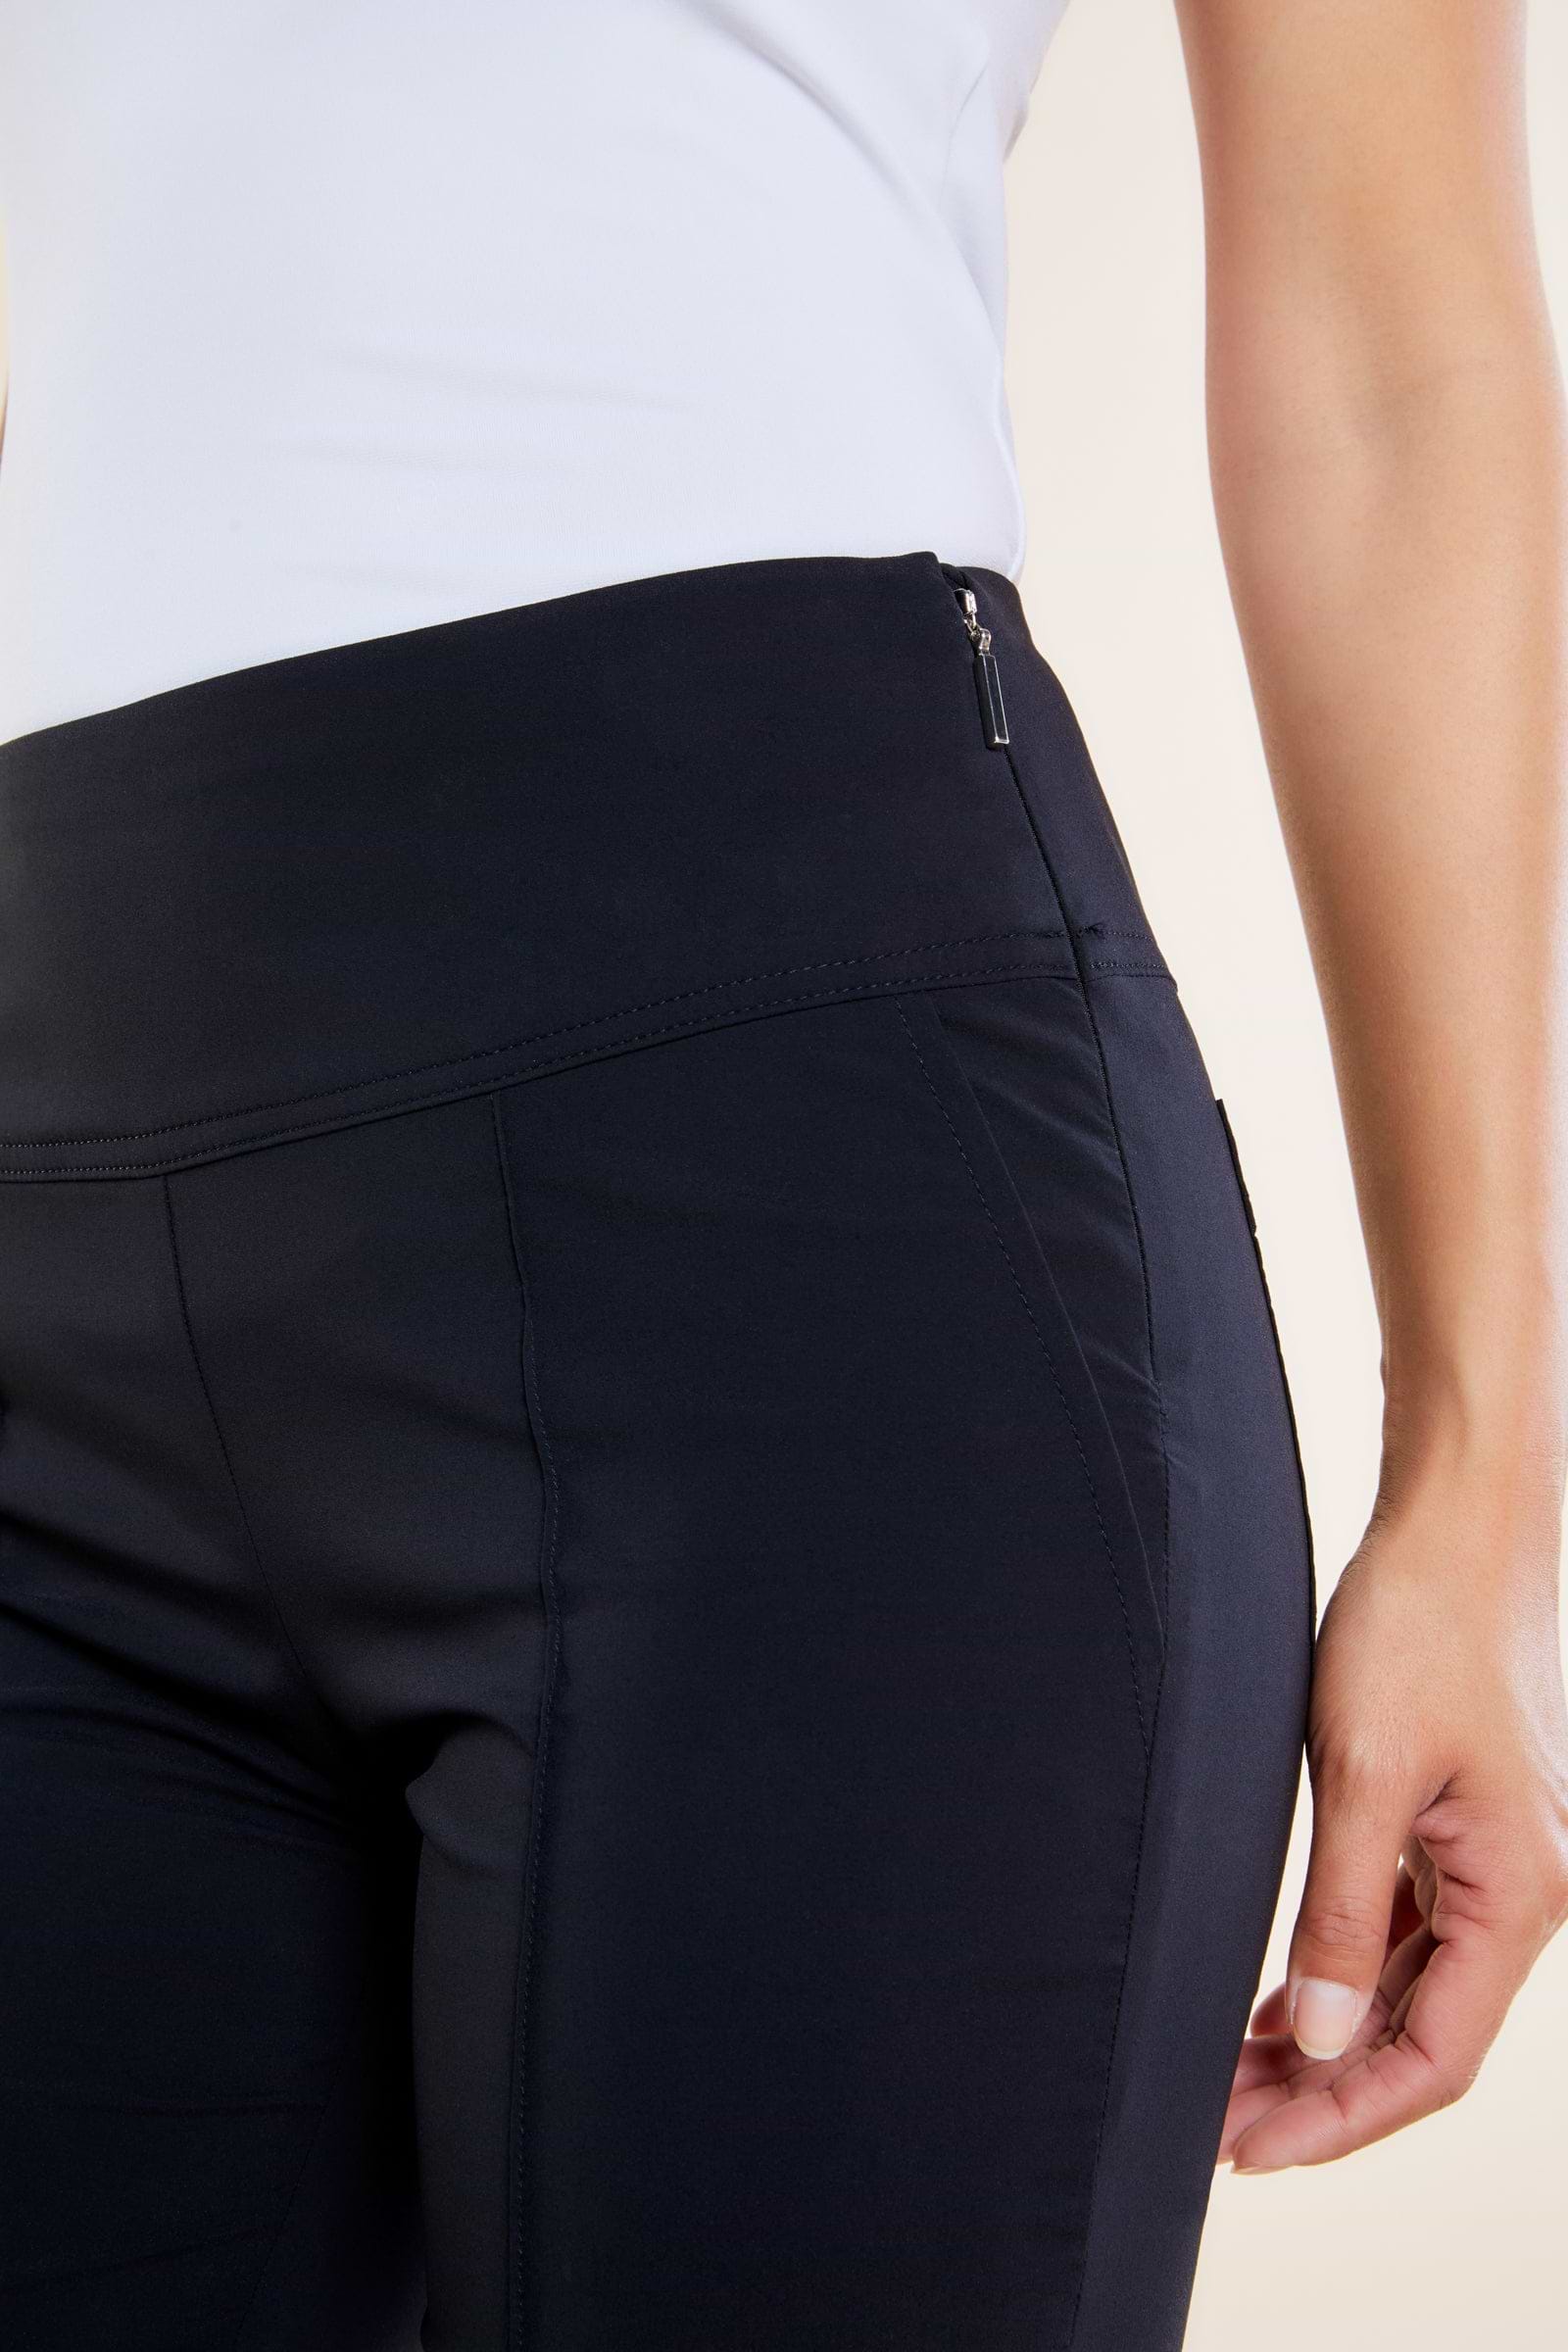 The Best Travel Pants. Side Zipper of the Sonia Curvy High Rise Pant in Black